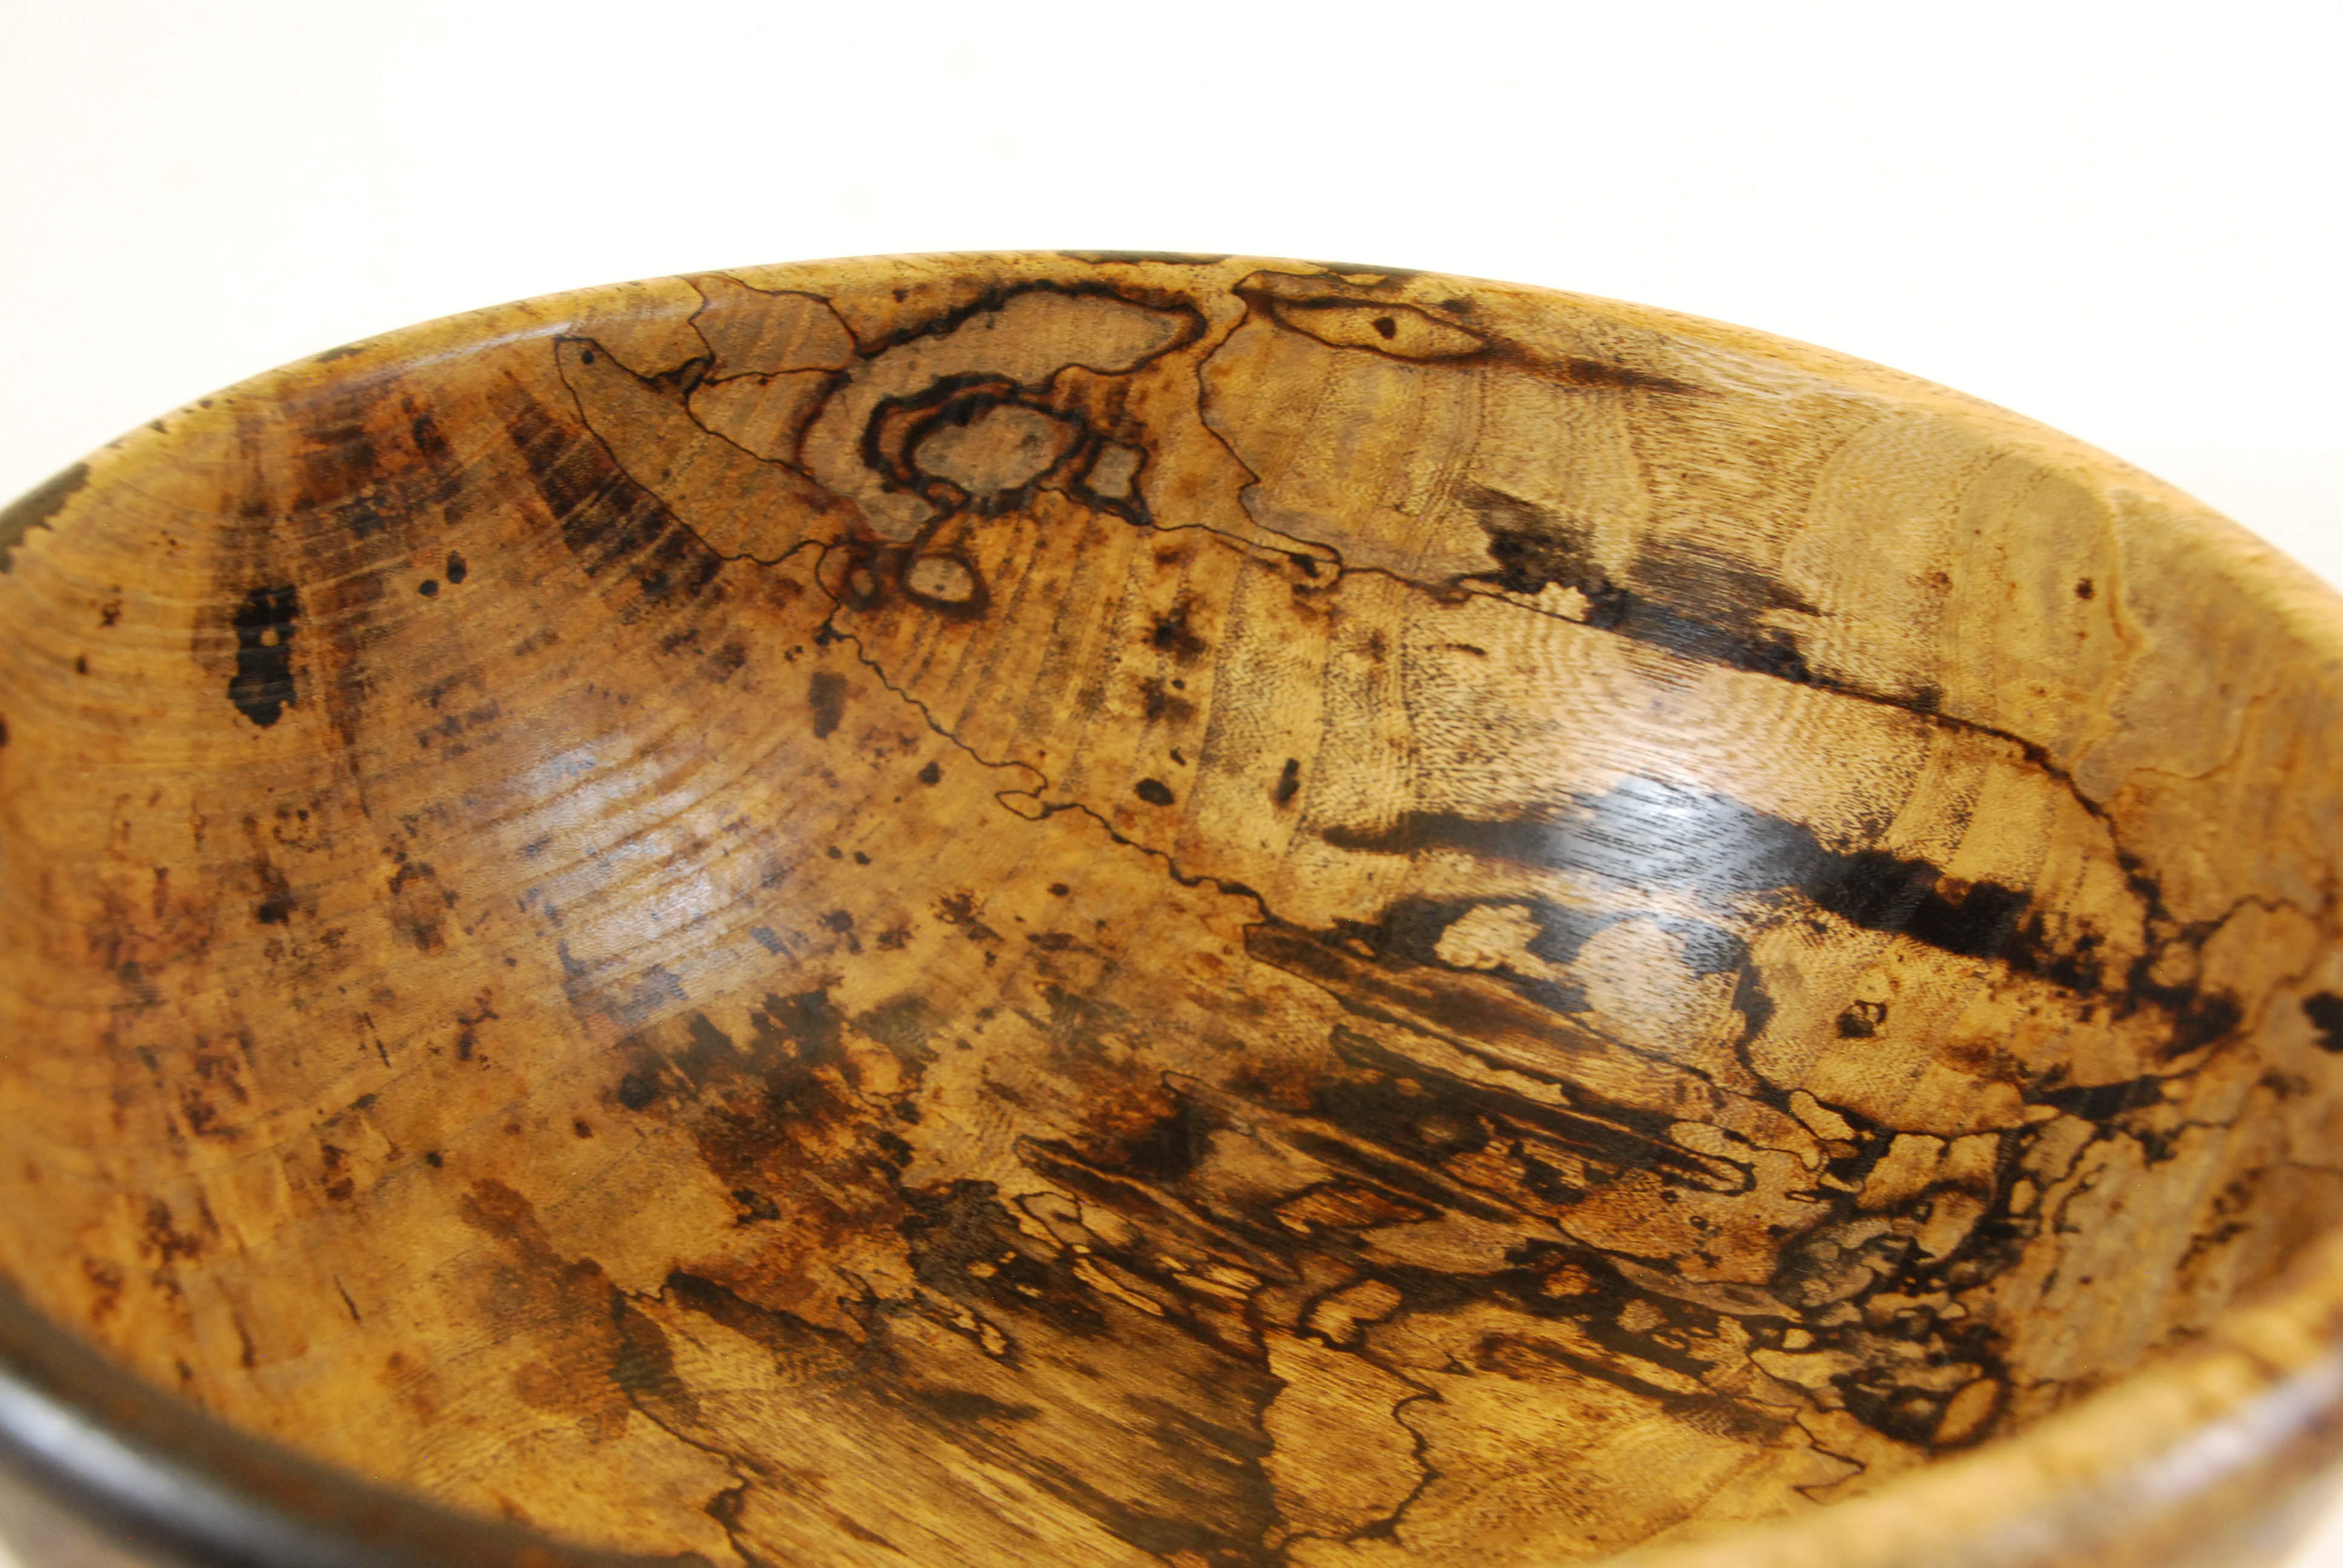 Spalted Hackberry Bowl